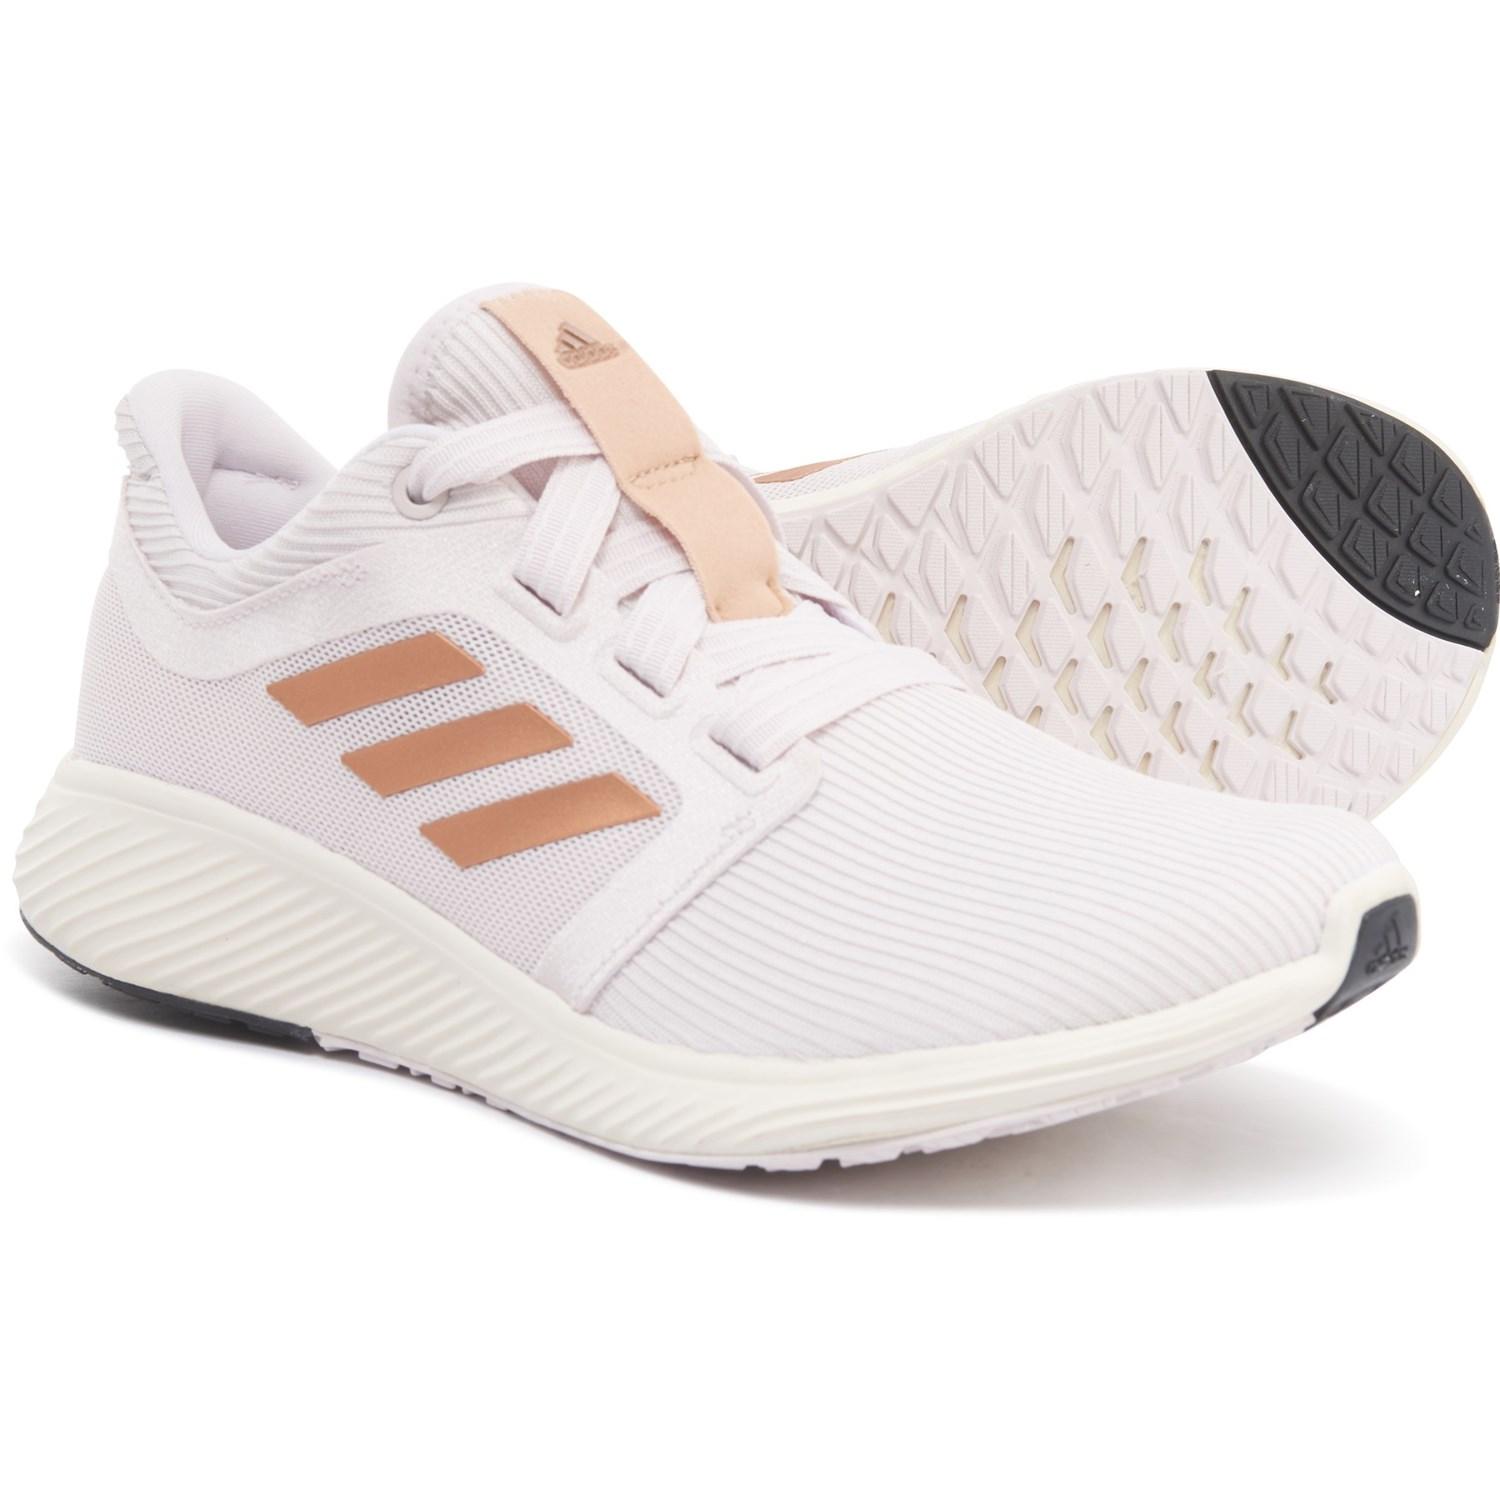 white adidas shoes with rose gold